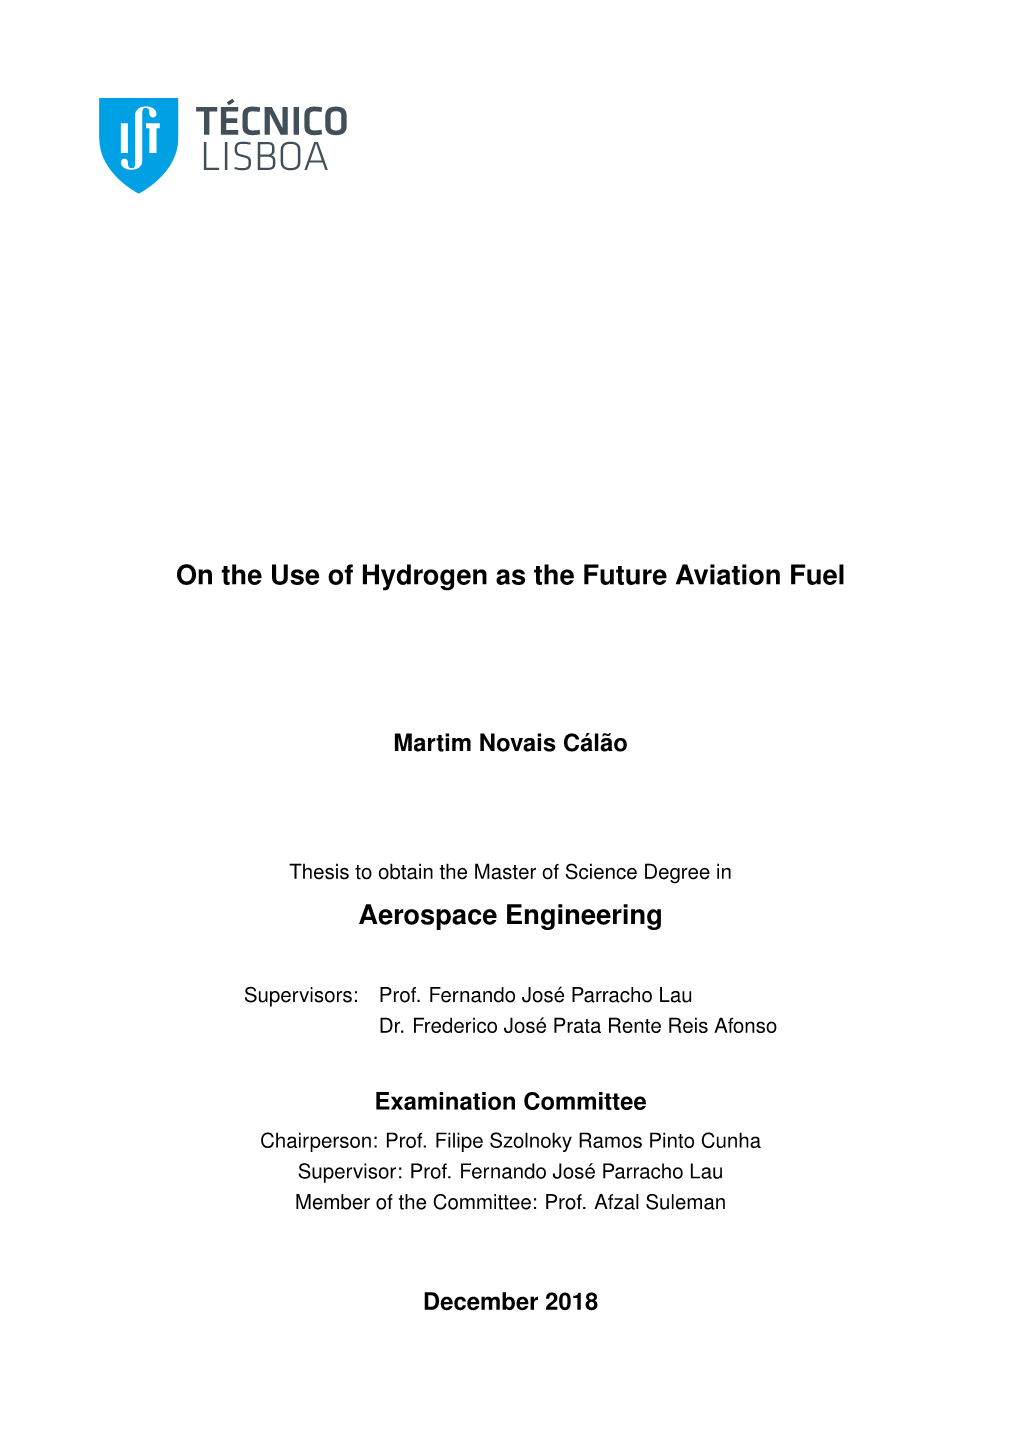 On the Use of Hydrogen As the Future Aviation Fuel Aerospace Engineering